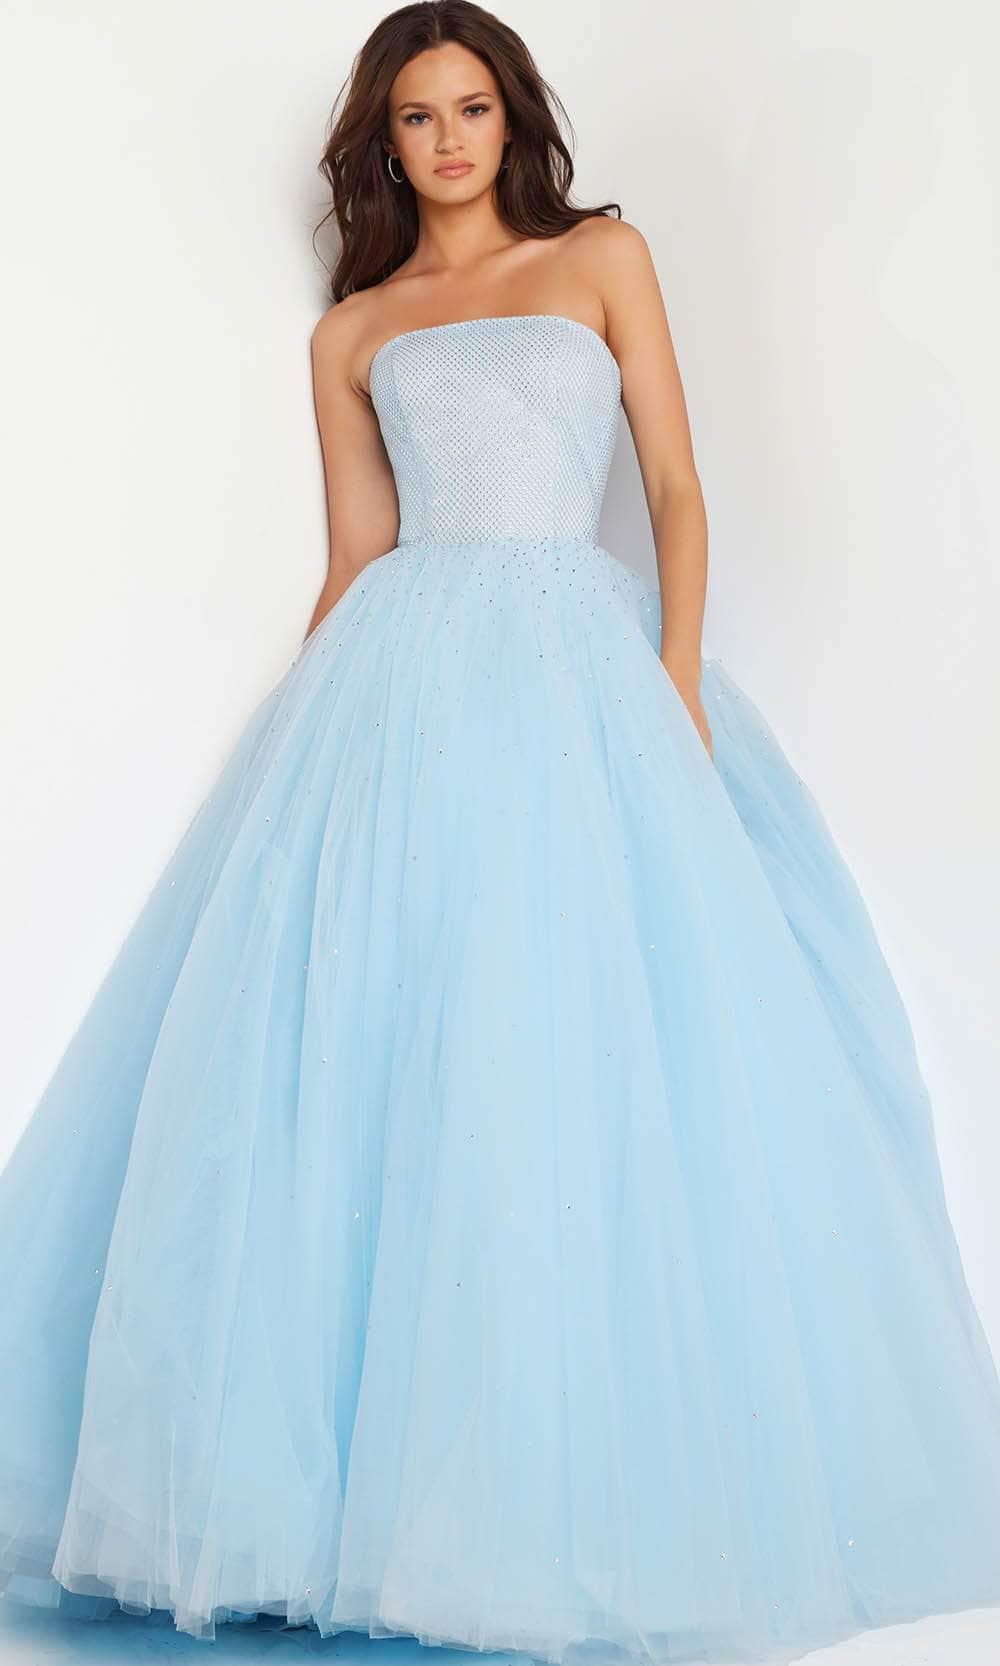 Jovani 25991 - Strapless Beaded Tulle Ballgown Special Occasion Dresses